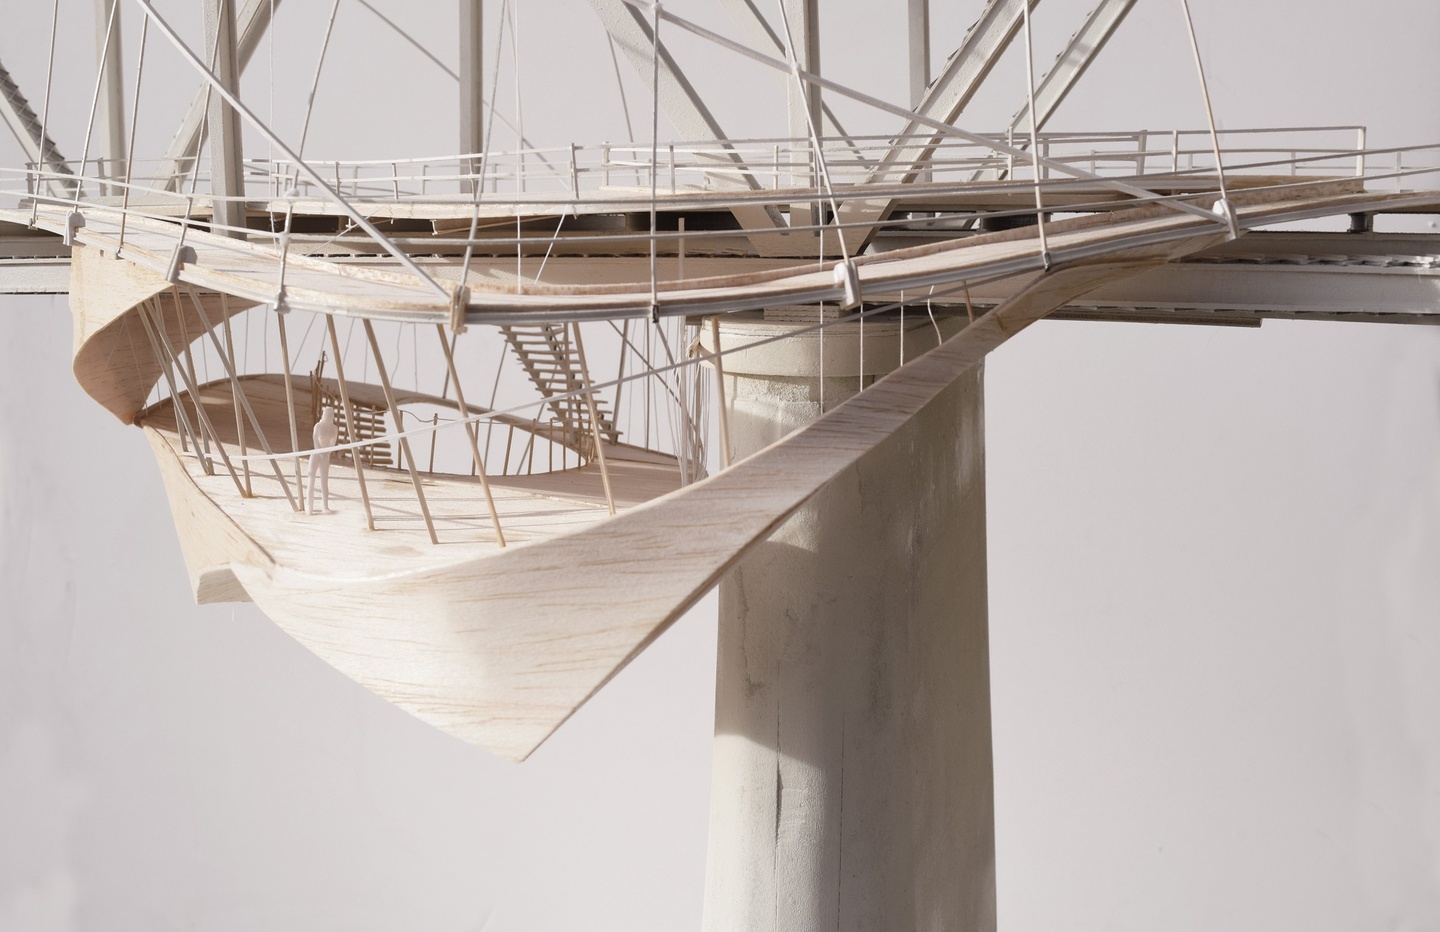 Basswood model of a steel truss bridge with a canoe-shaped observation deck suspended from the side.